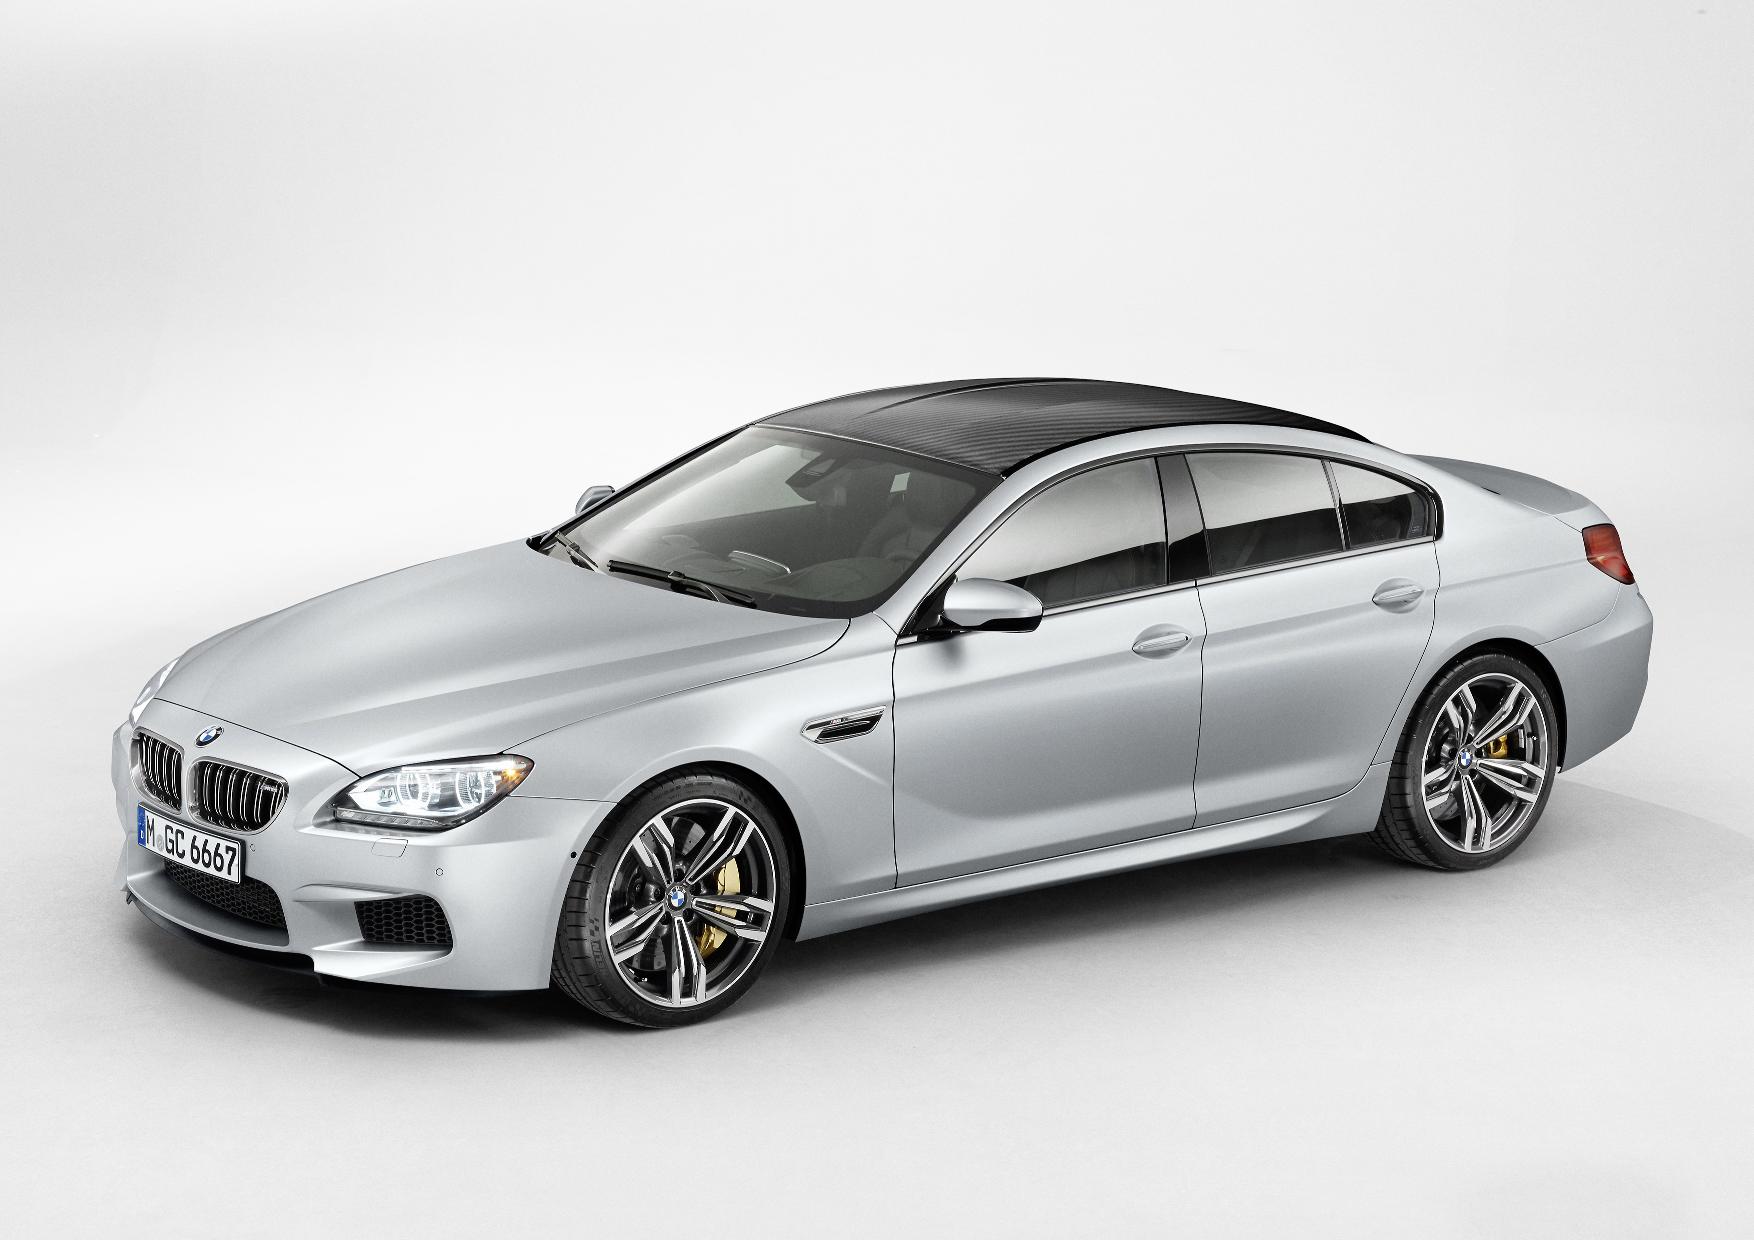  Lease on Bmw S New M6 Gran Coupe   Car News And Reviews   First Vehicle Leasing